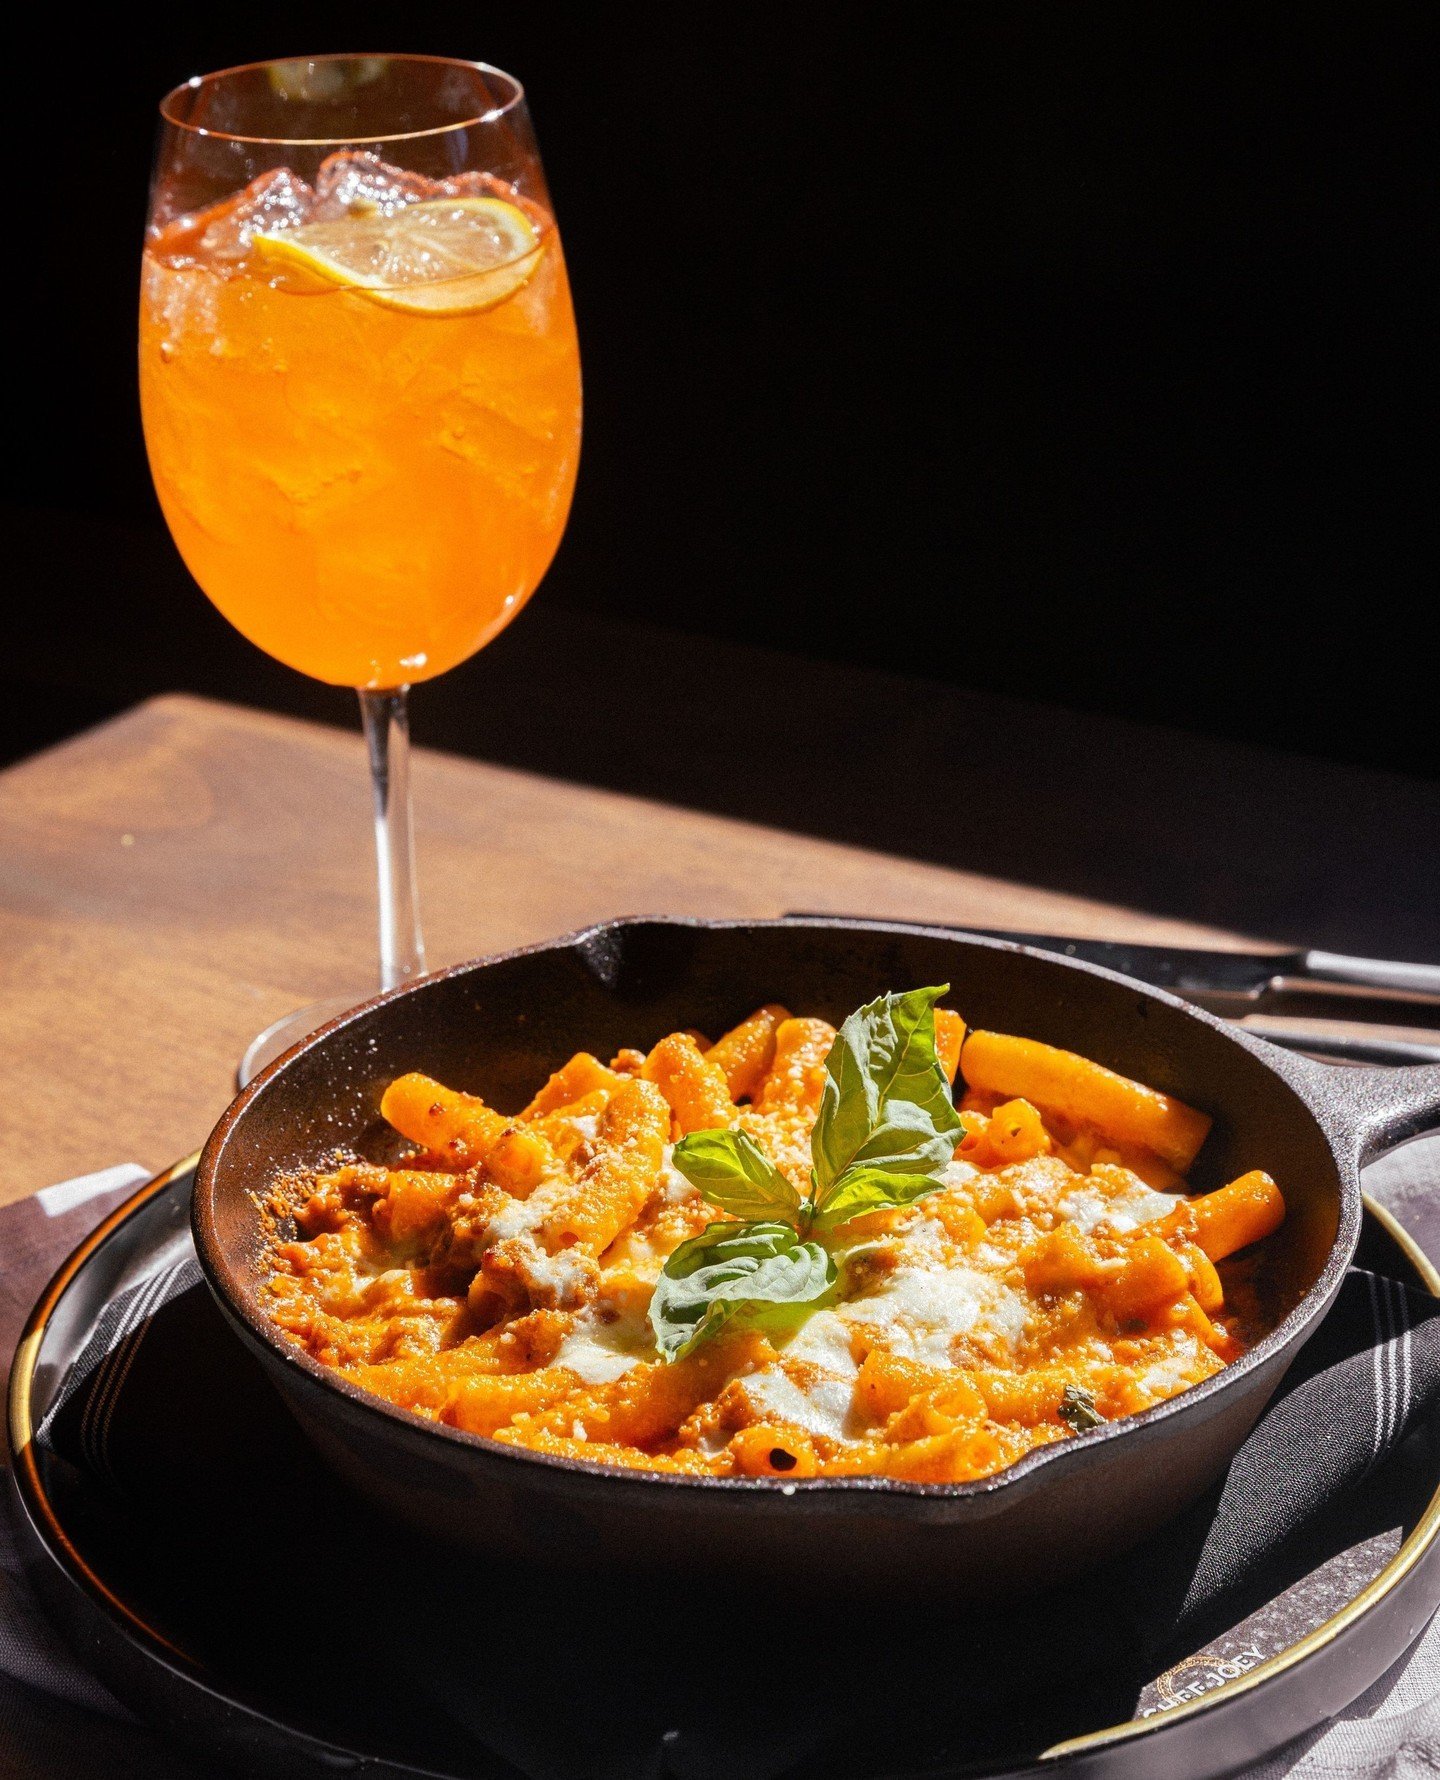 Sunday calls for delicious cocktails and yummy baked ziti 🤤⁠
⁠
And apparently a really orange-colored meal...⁠
⁠
But hey, I like to be color coordinated 😉⁠
⁠
If you want the meal, you gotta be the meal 👀⁠
⁠
We're on OpenTable for reservations! ⁠
.